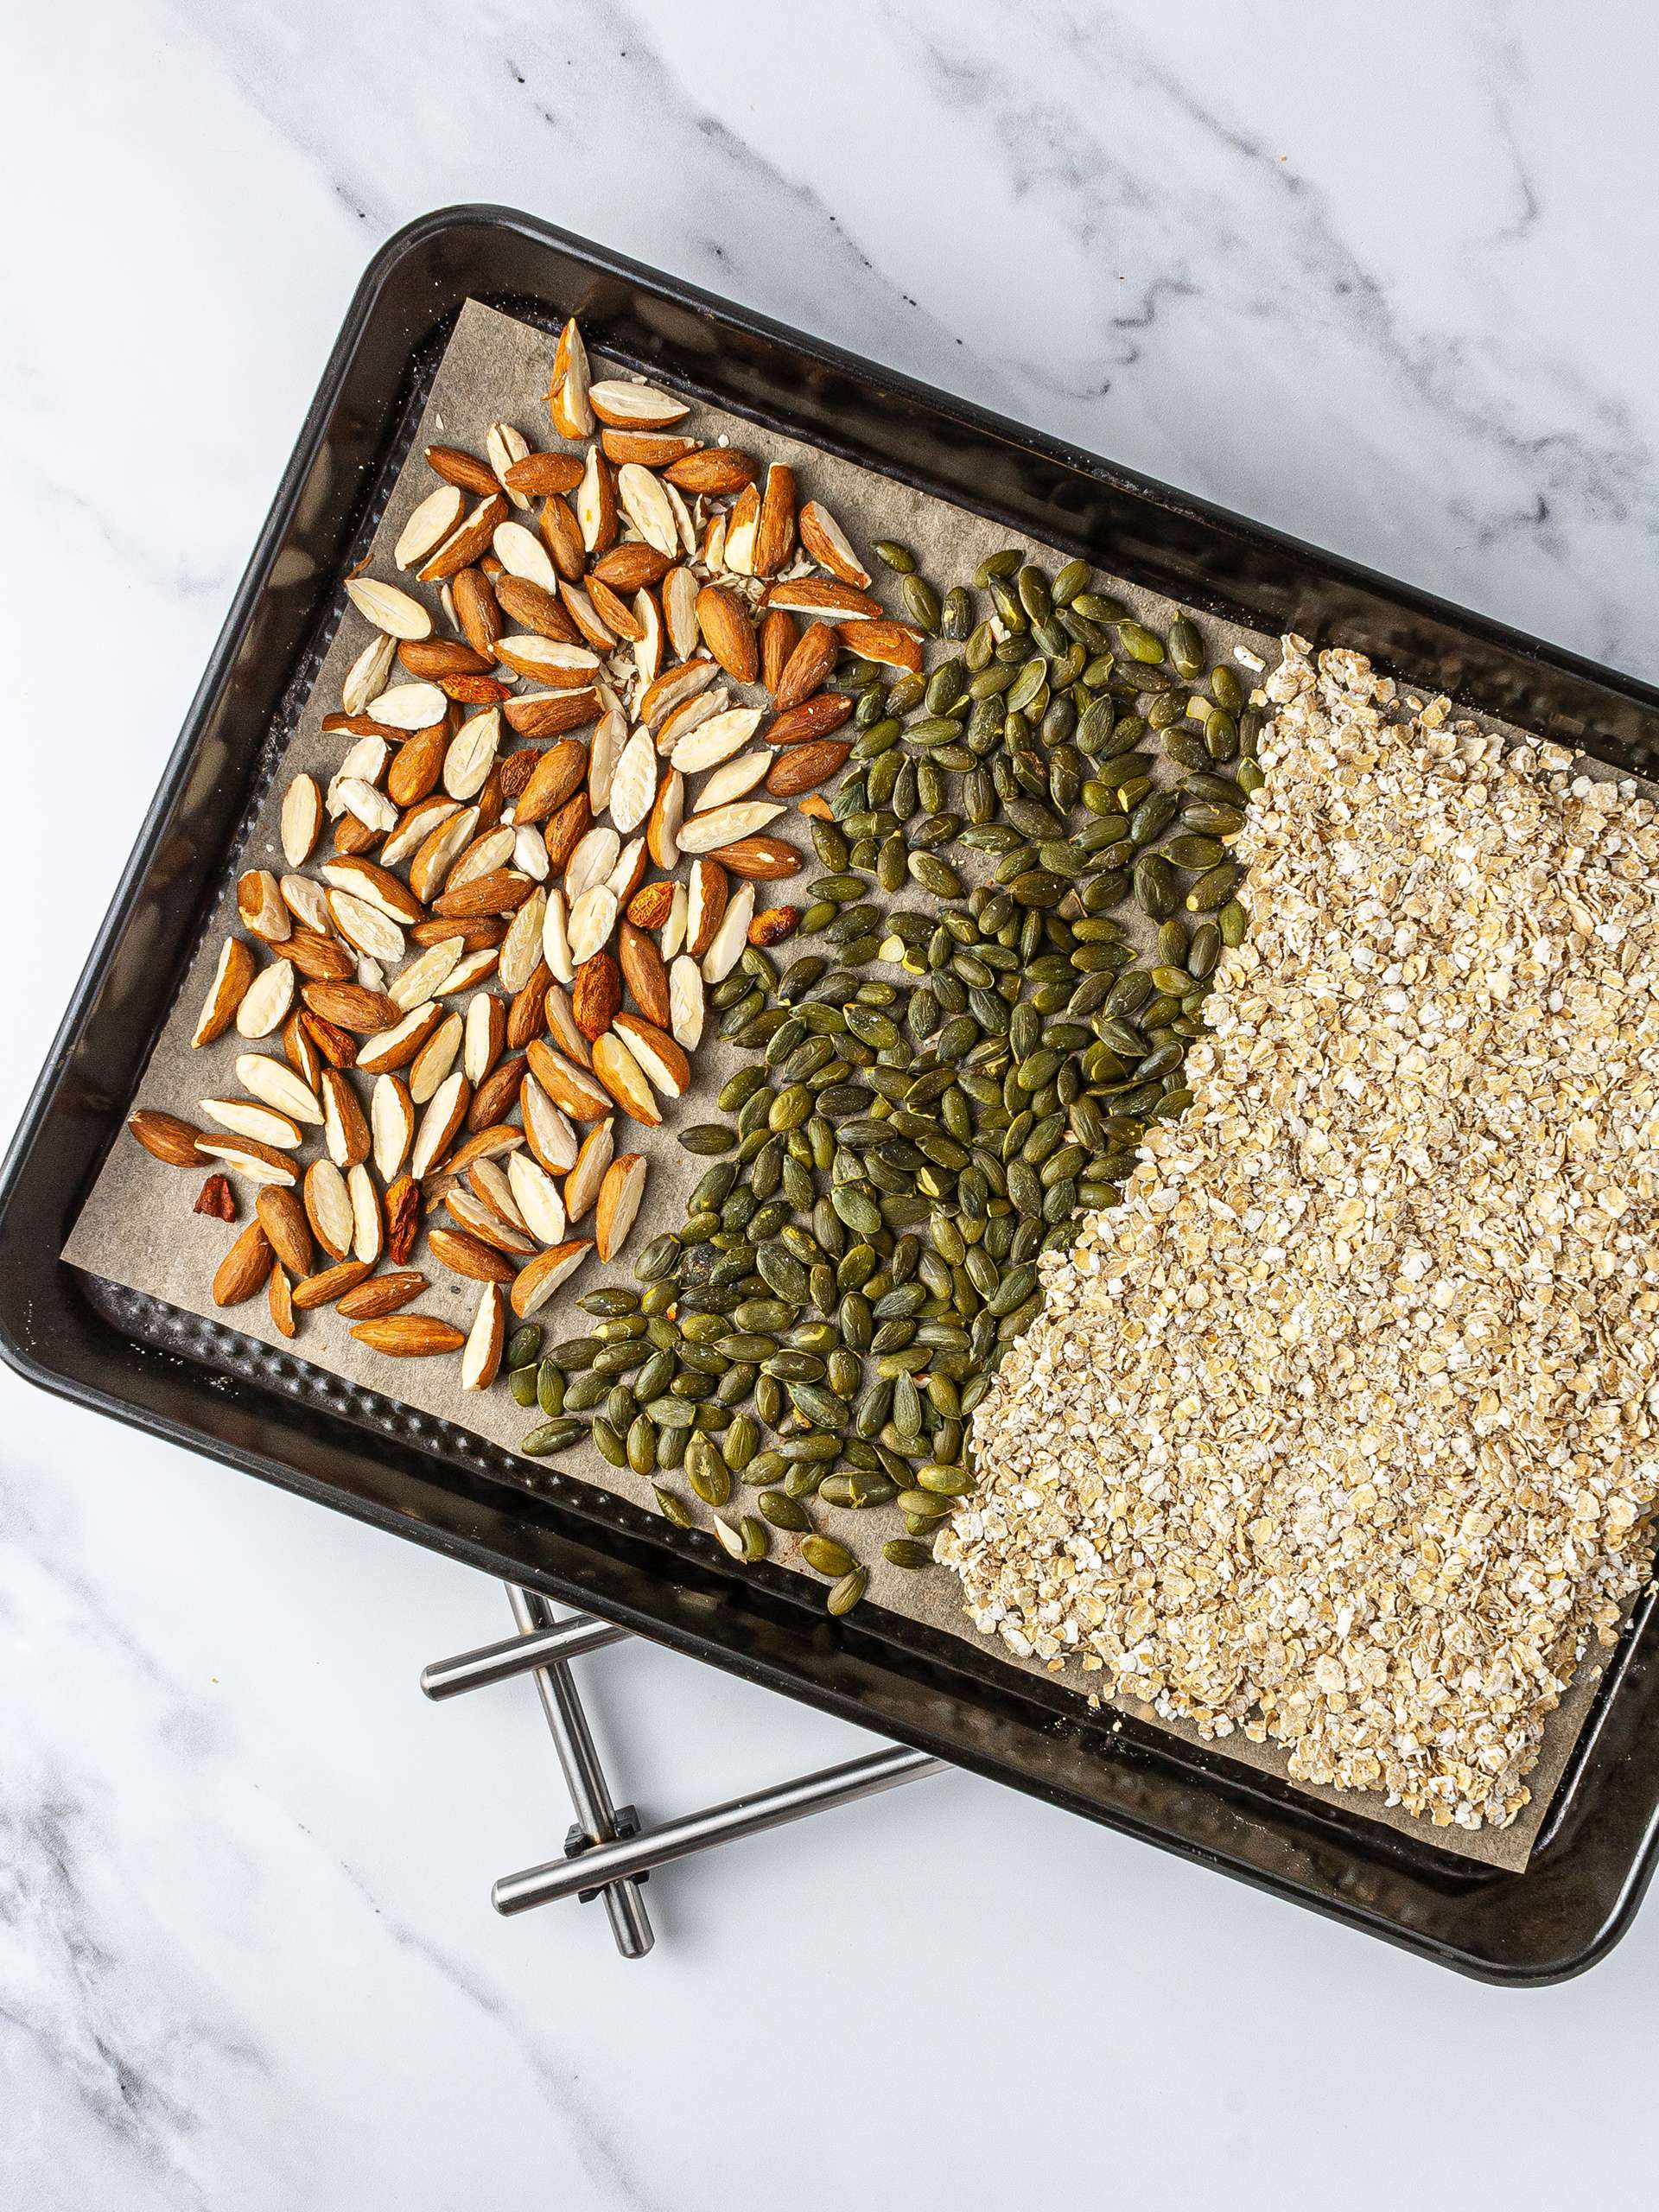 Oat flakes, almonds, and pumpkin seeds roasted in a baking tin.